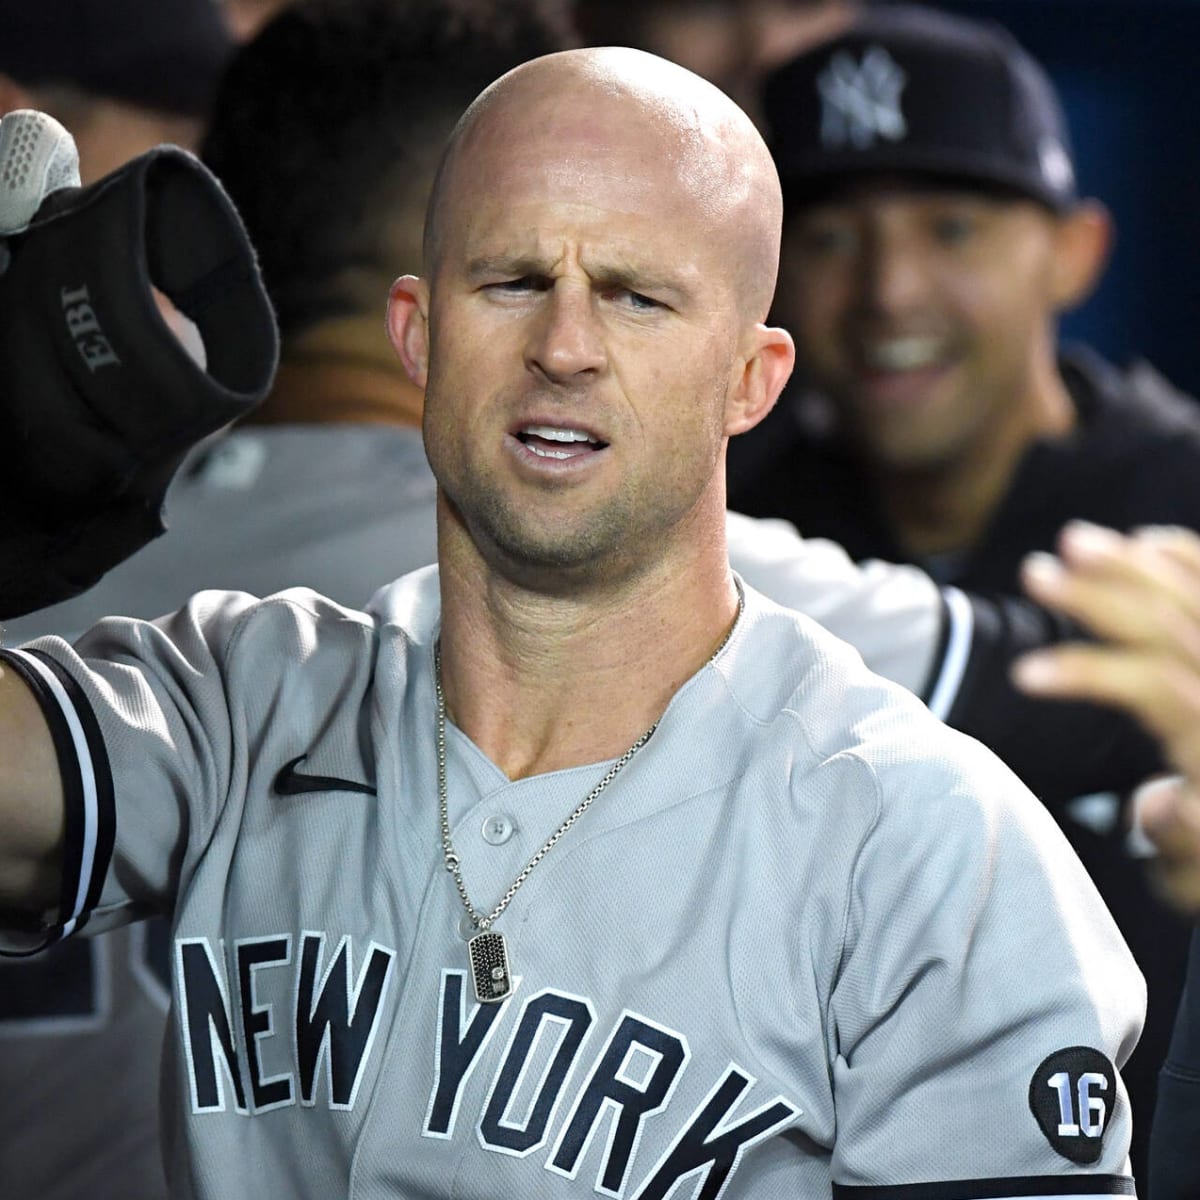 Brett Gardner would rather retire if not playing with Yankees